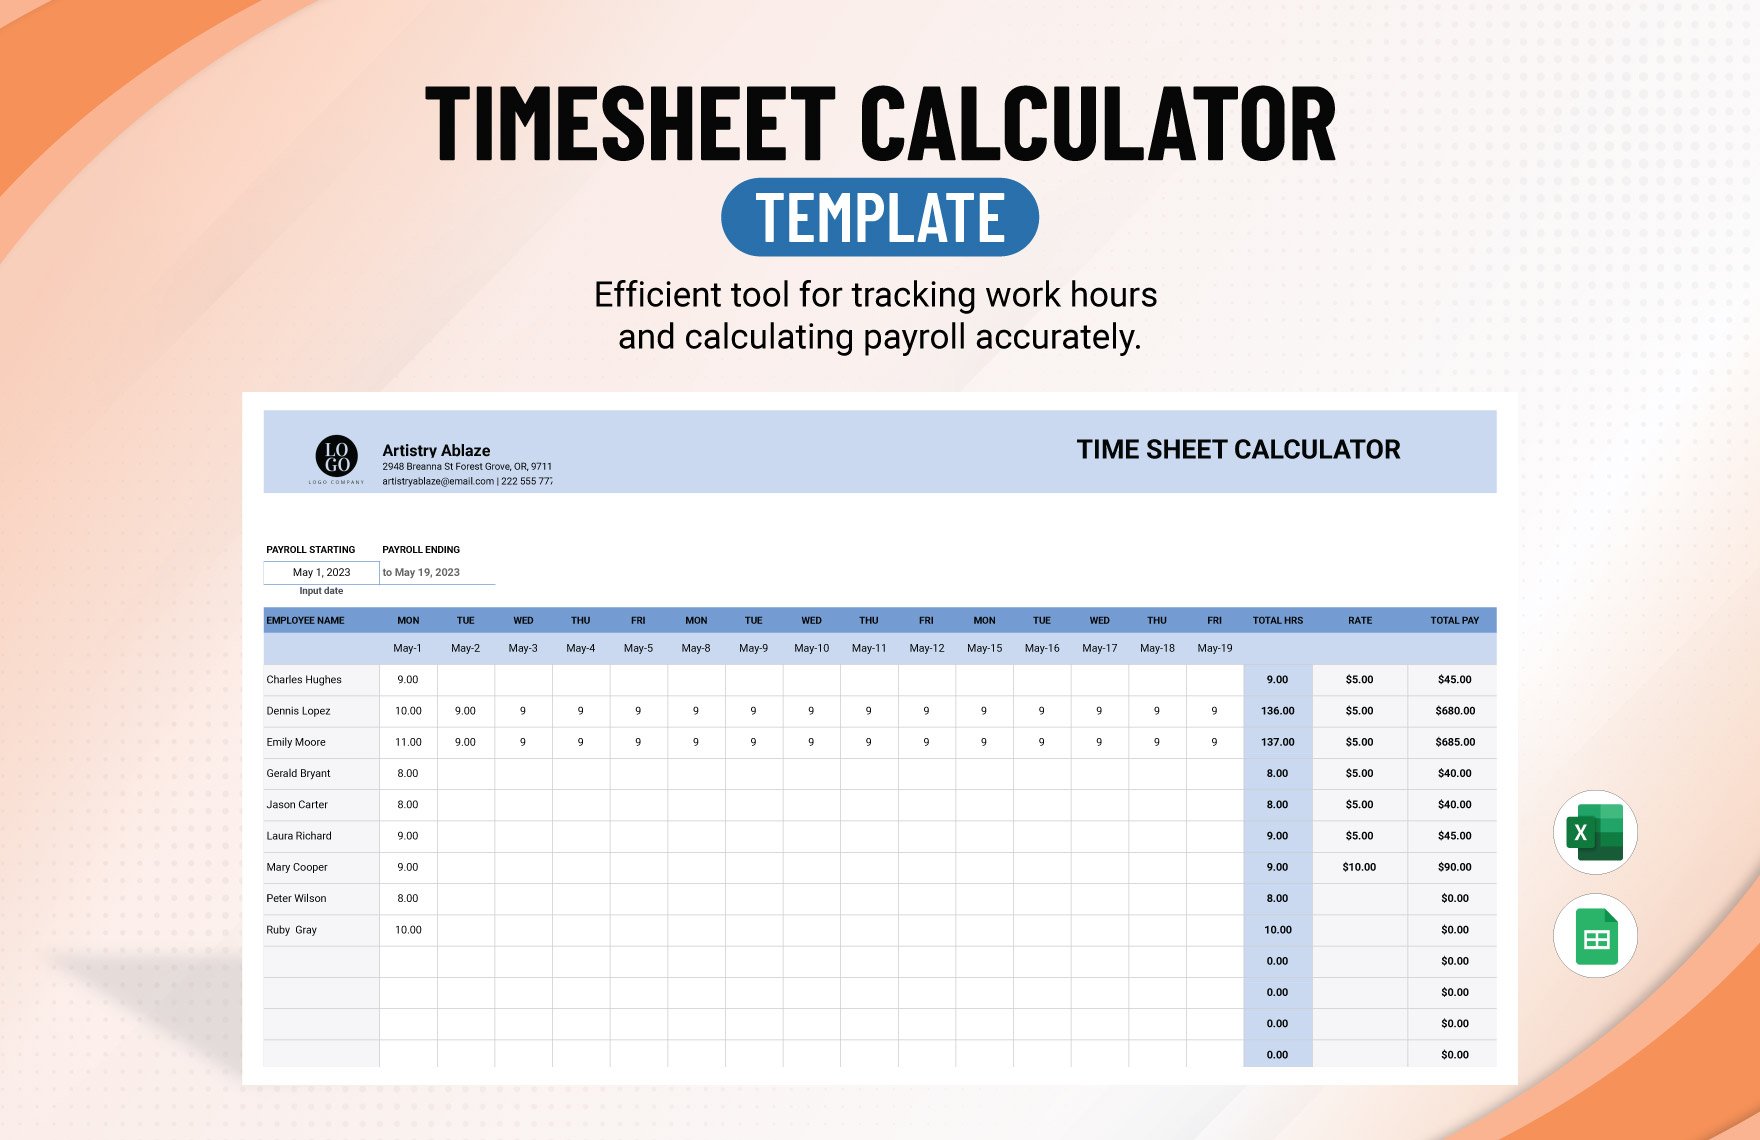 Free Timesheet Calculator Template in Excel, Google Sheets